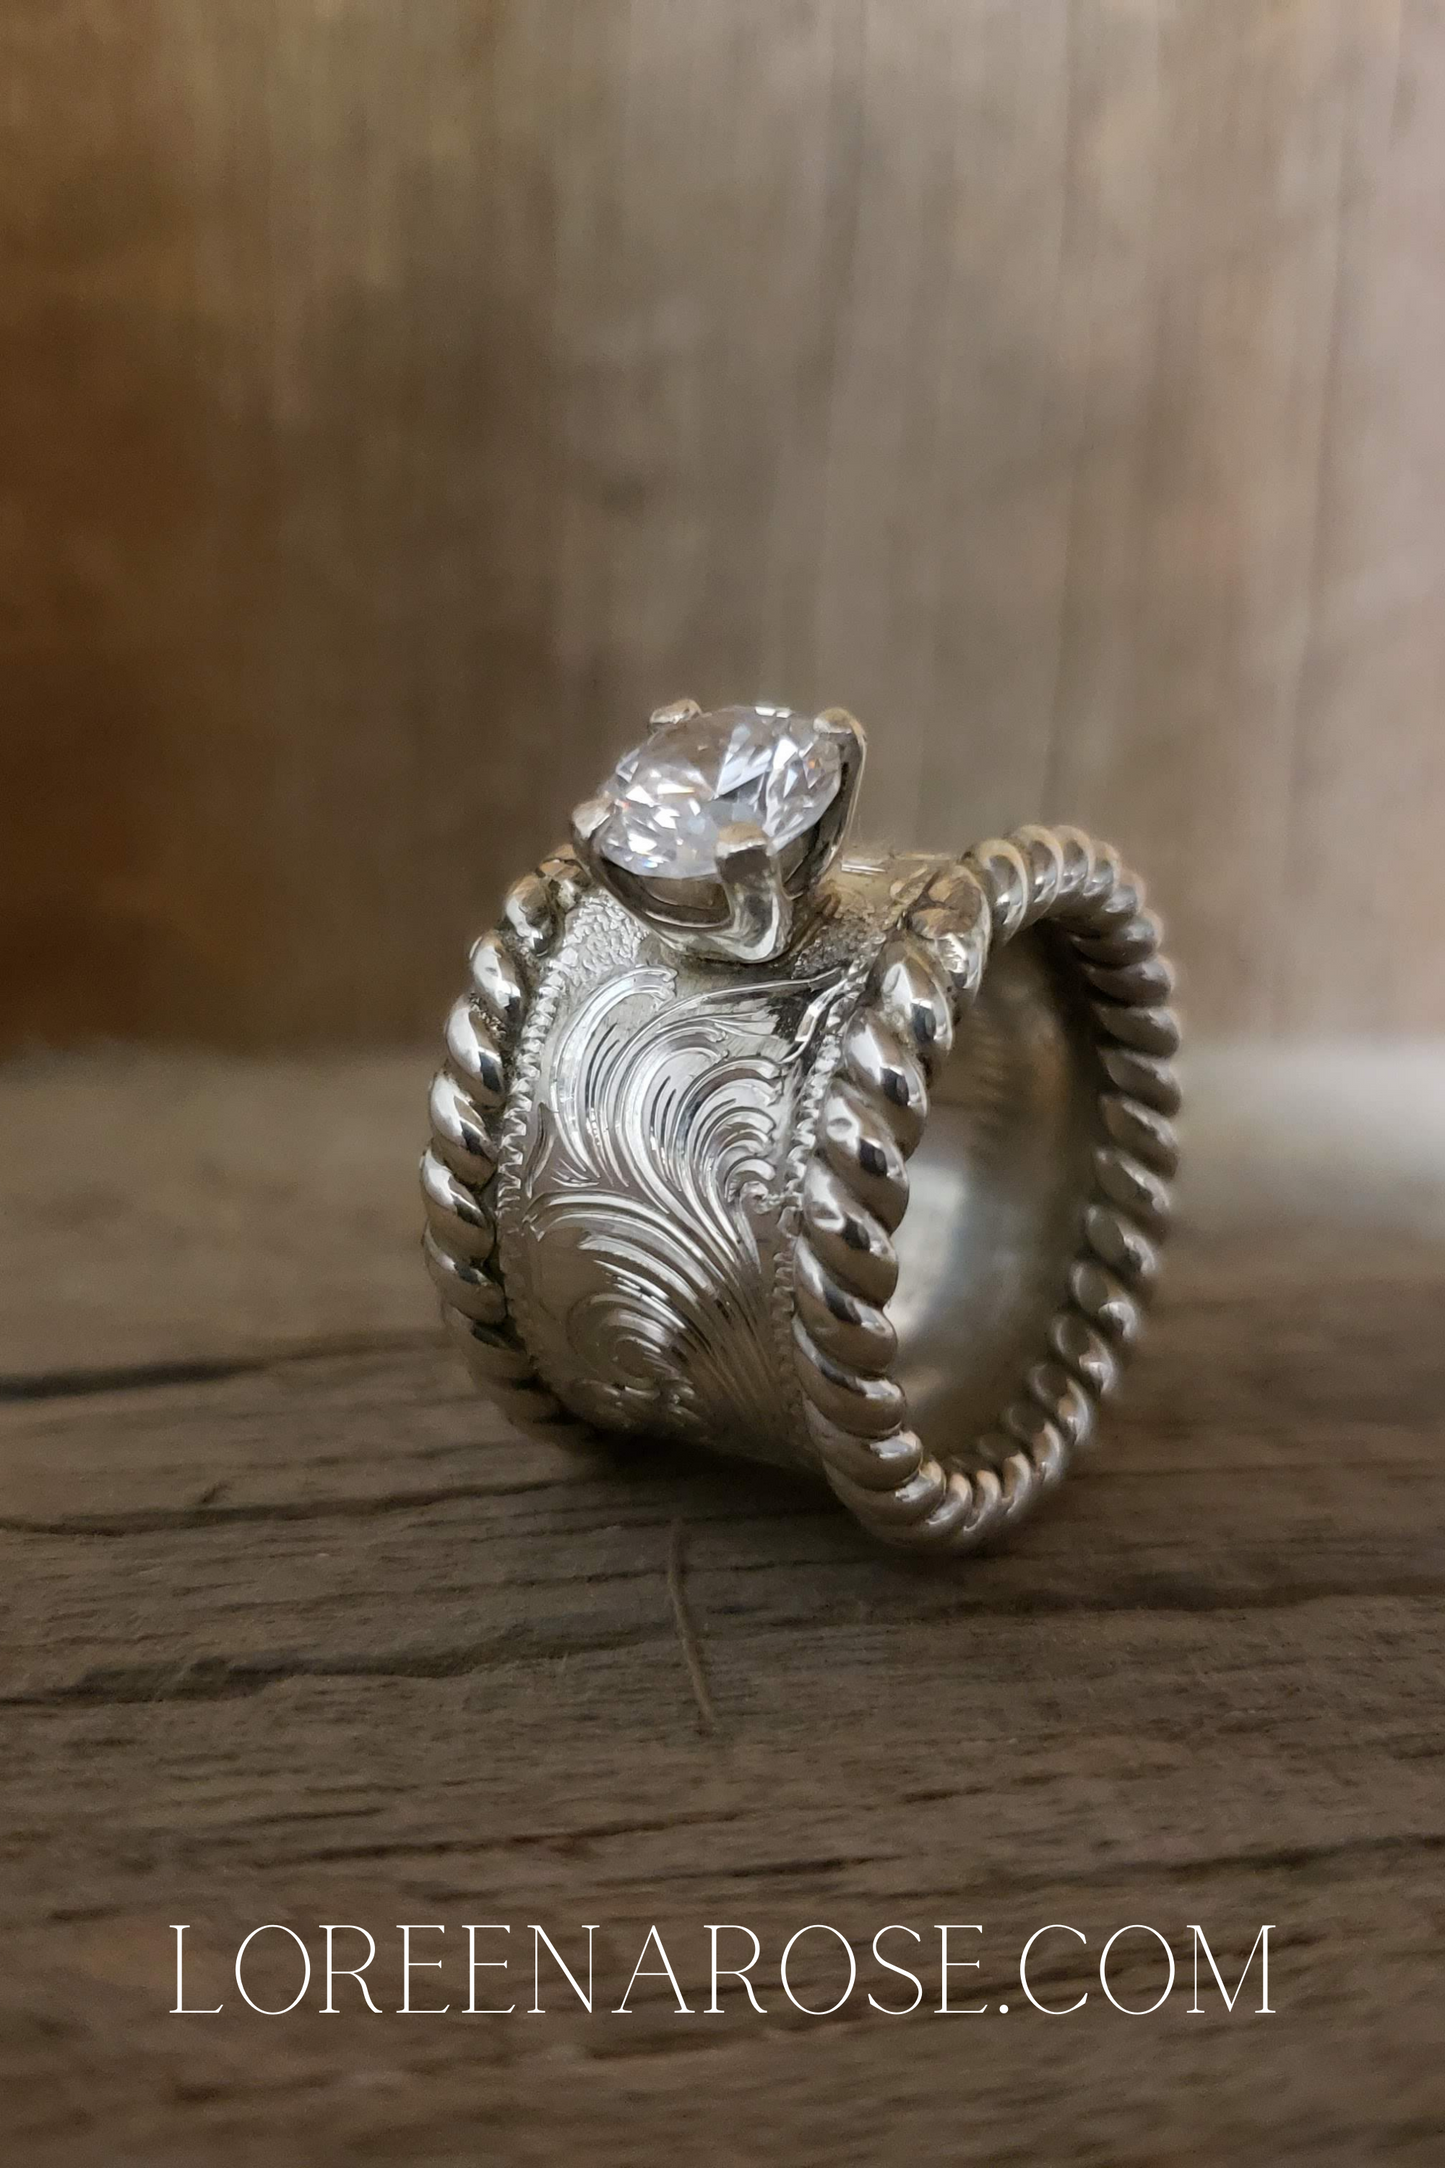 Unique Sterling Silver Western Engagement Ring, Wedding Band, Round Stone, Hand Engraved, Bridal Jewelry, Anniversary Gift For Her, by Loreena Rose